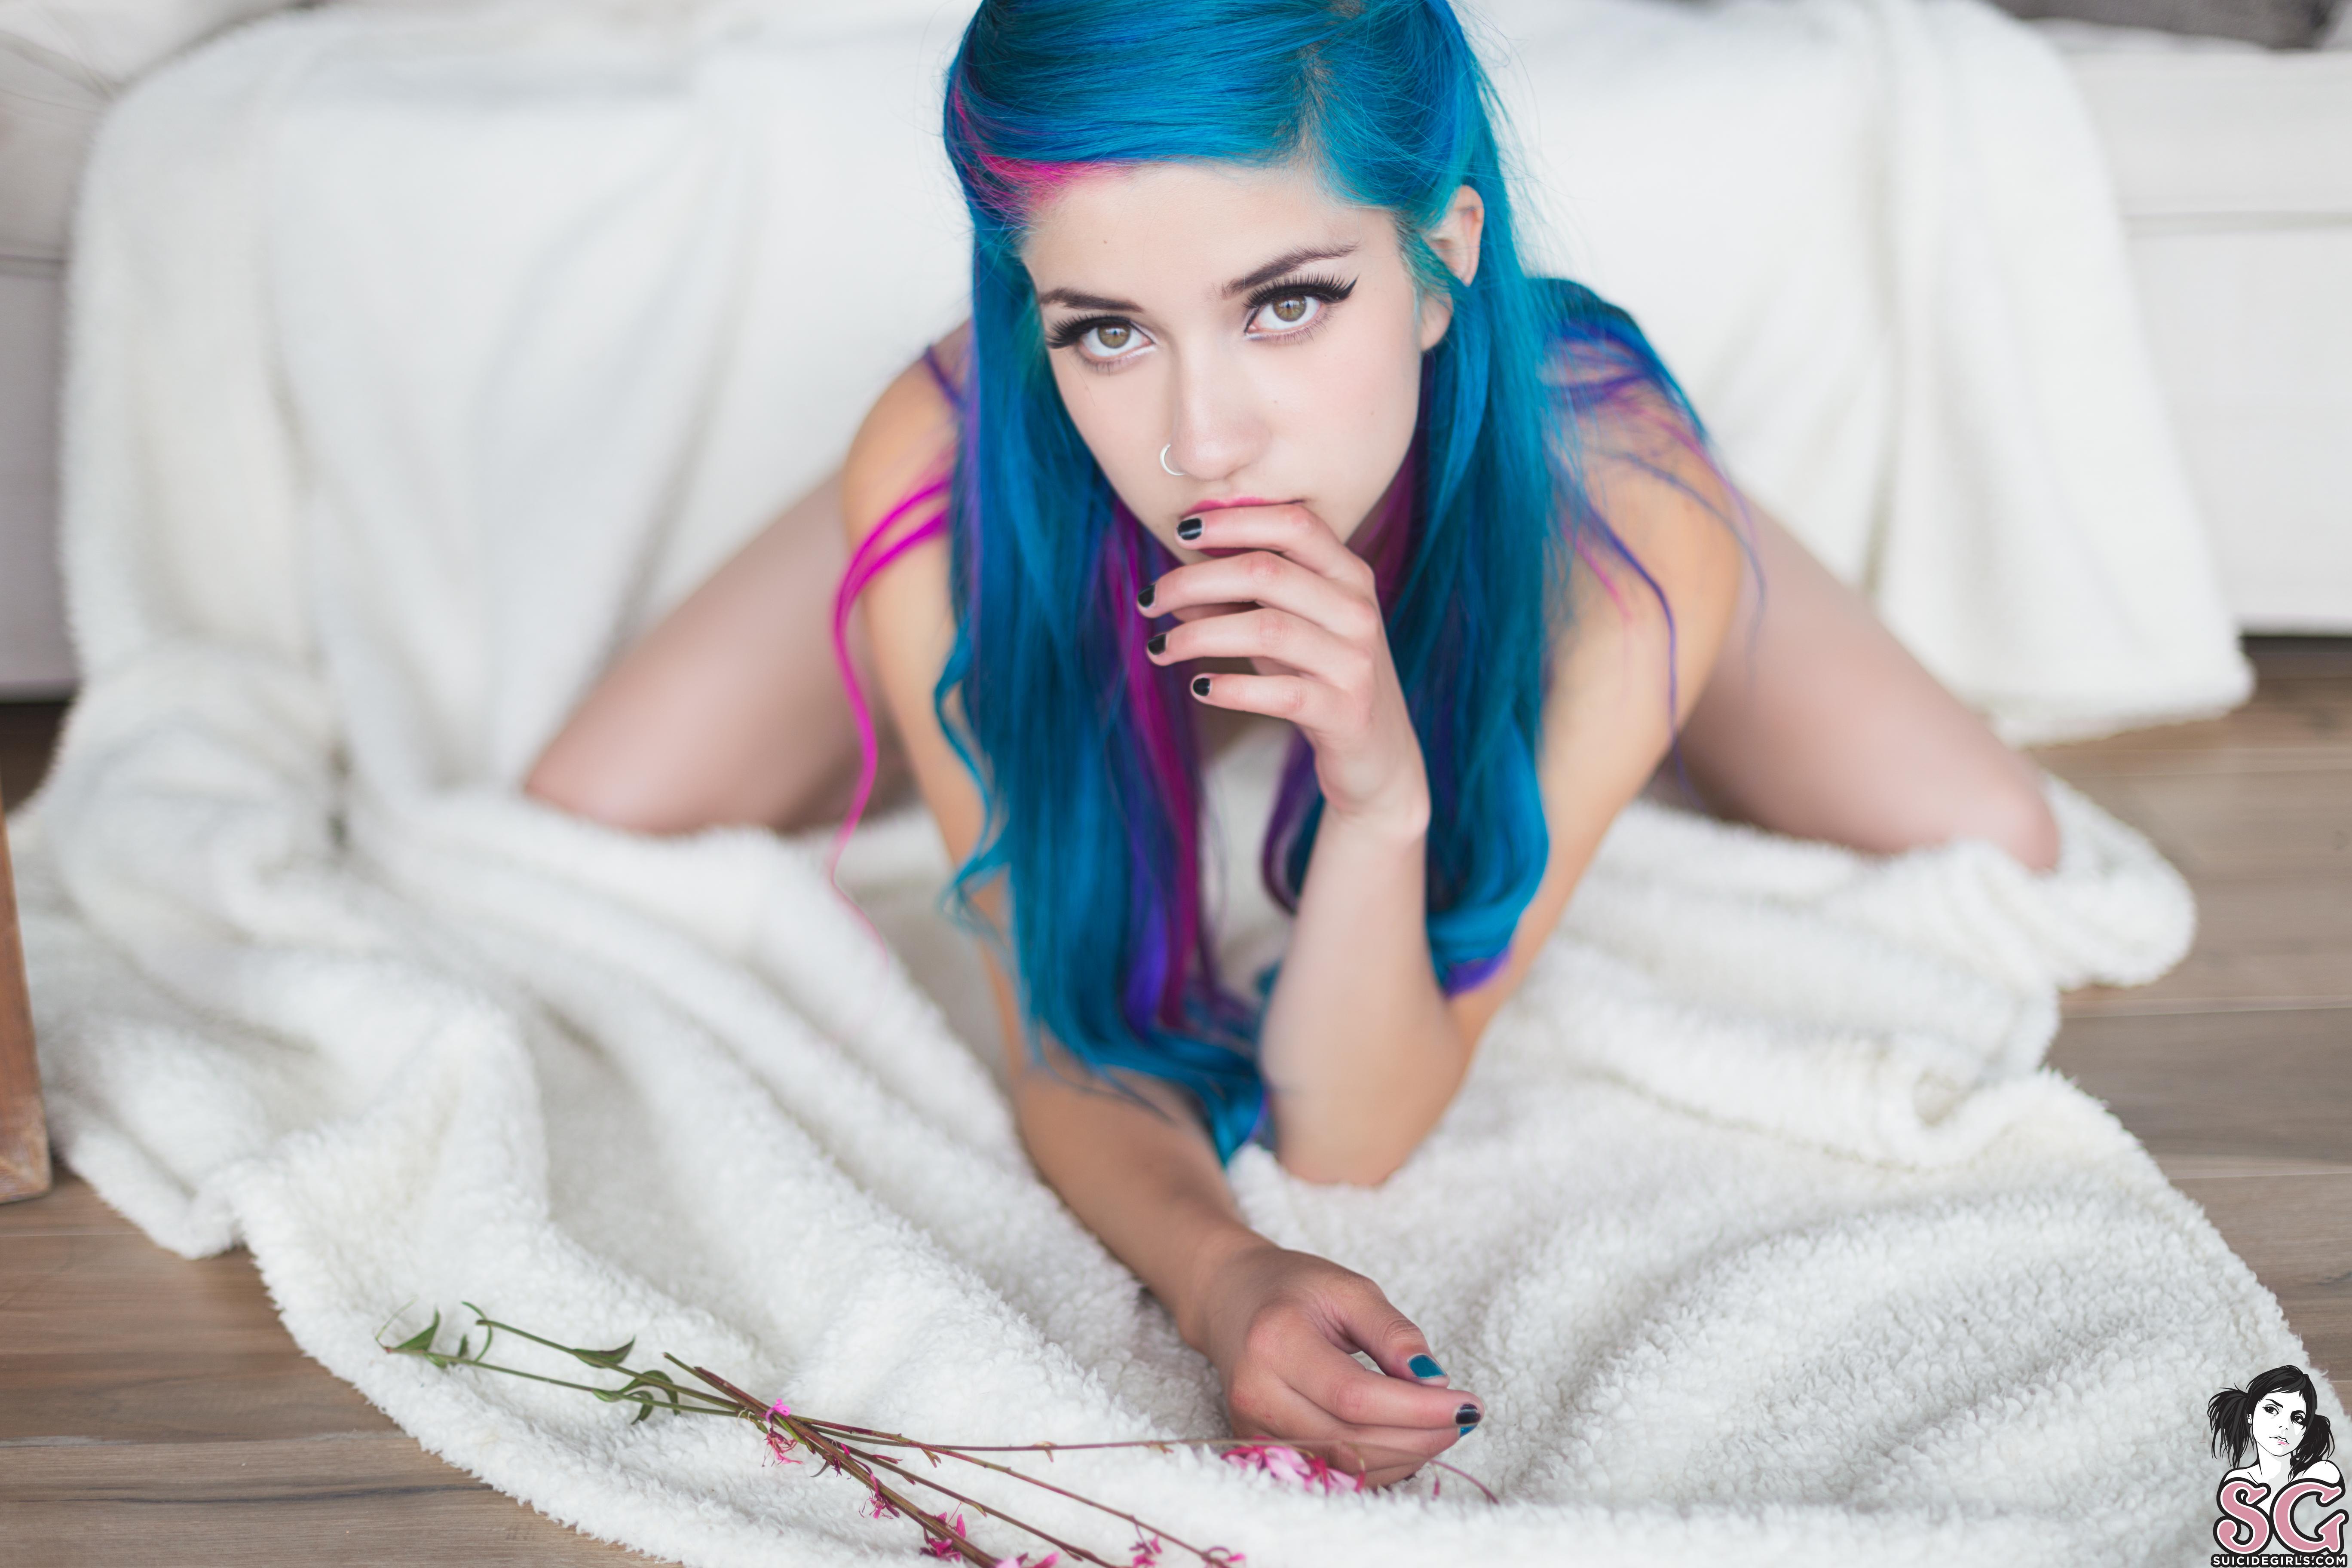 Mixed girl with blue hair takes best adult free photo